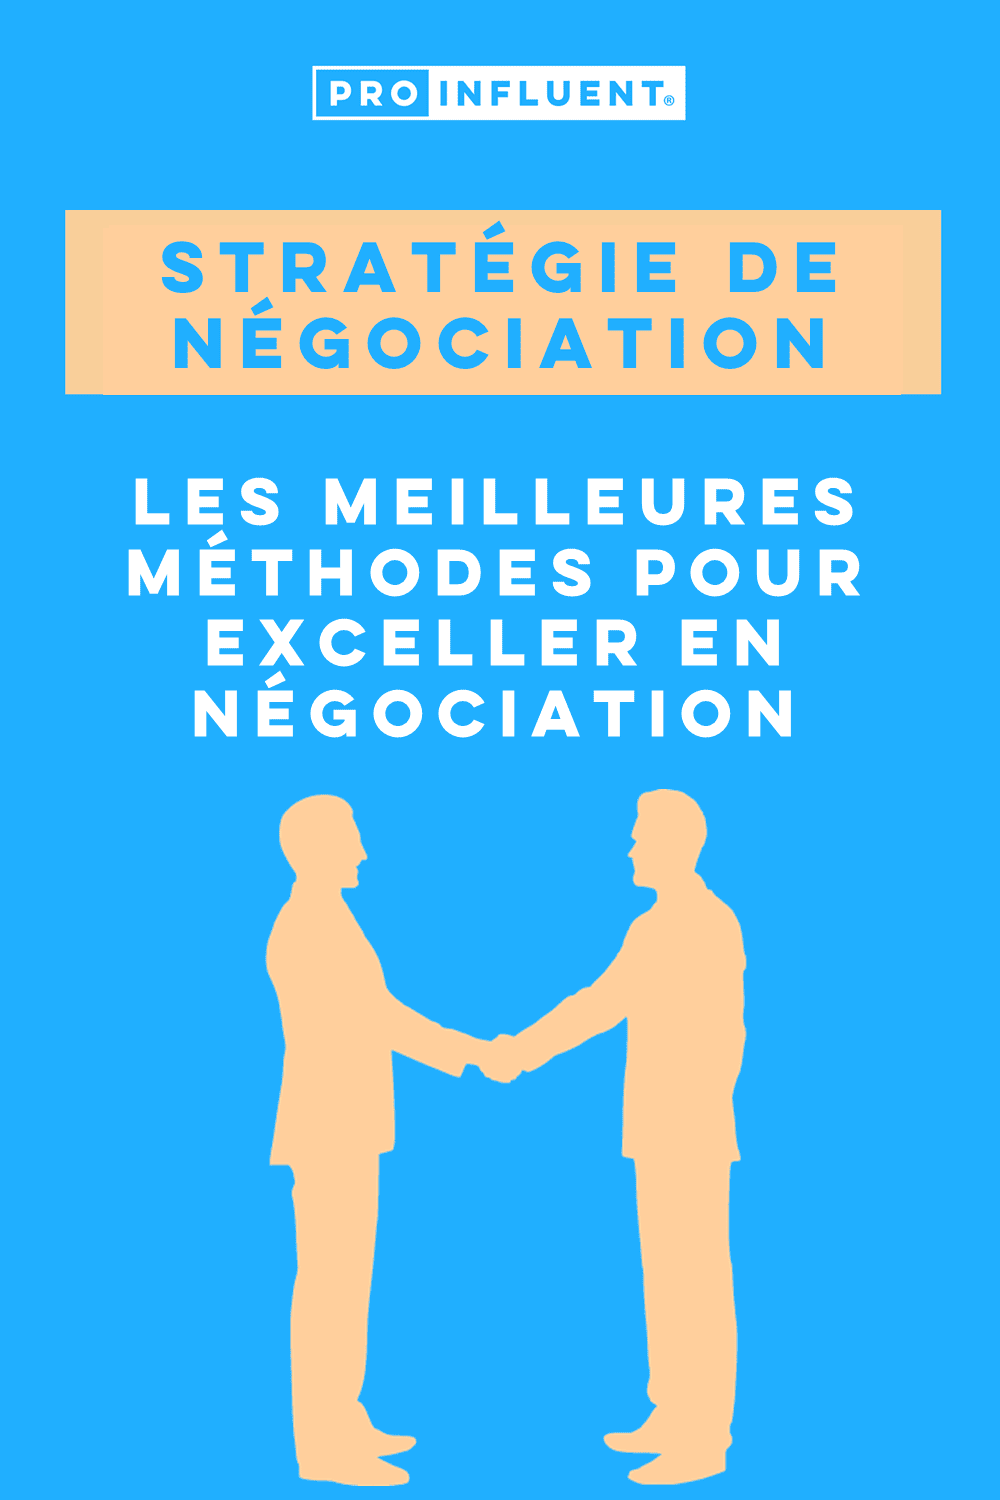 Negotiation strategy: the best methods to excel in negotiation!